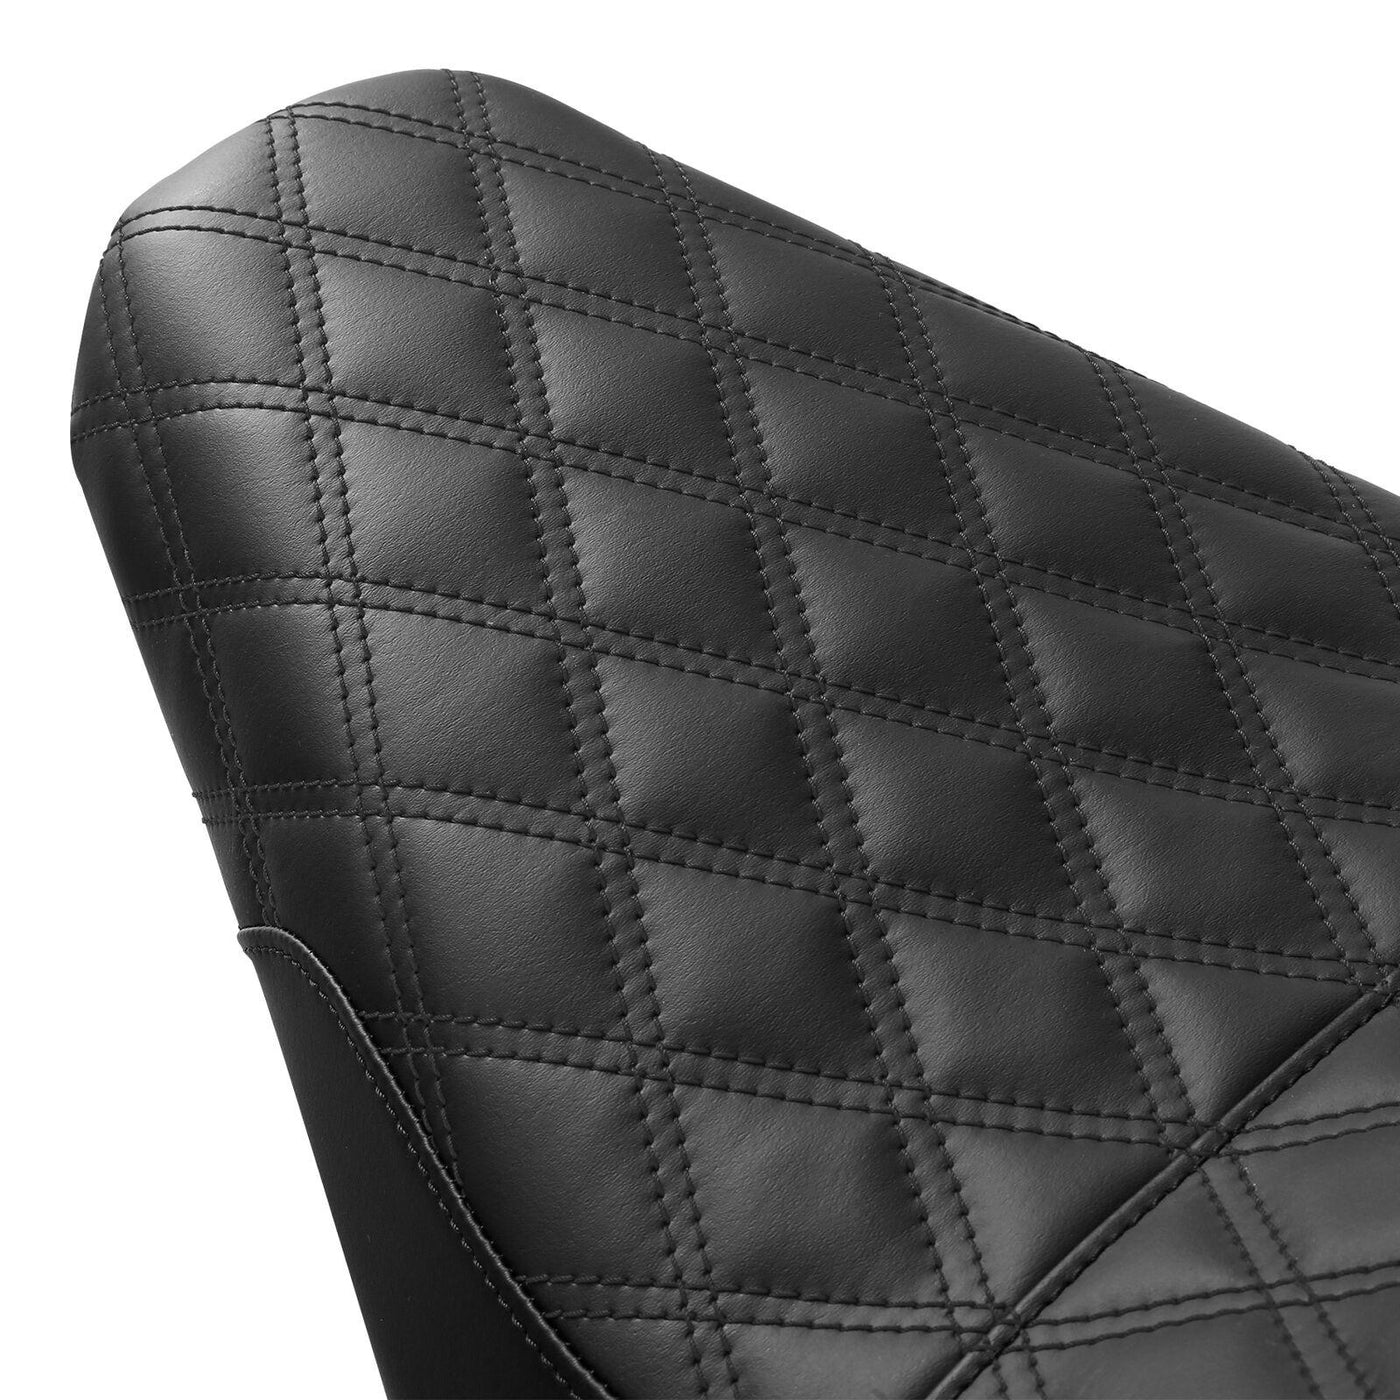 Driver Rider Passenger Seat Fit For Harley Softail Street Bob Standard 2018-2021 - Moto Life Products